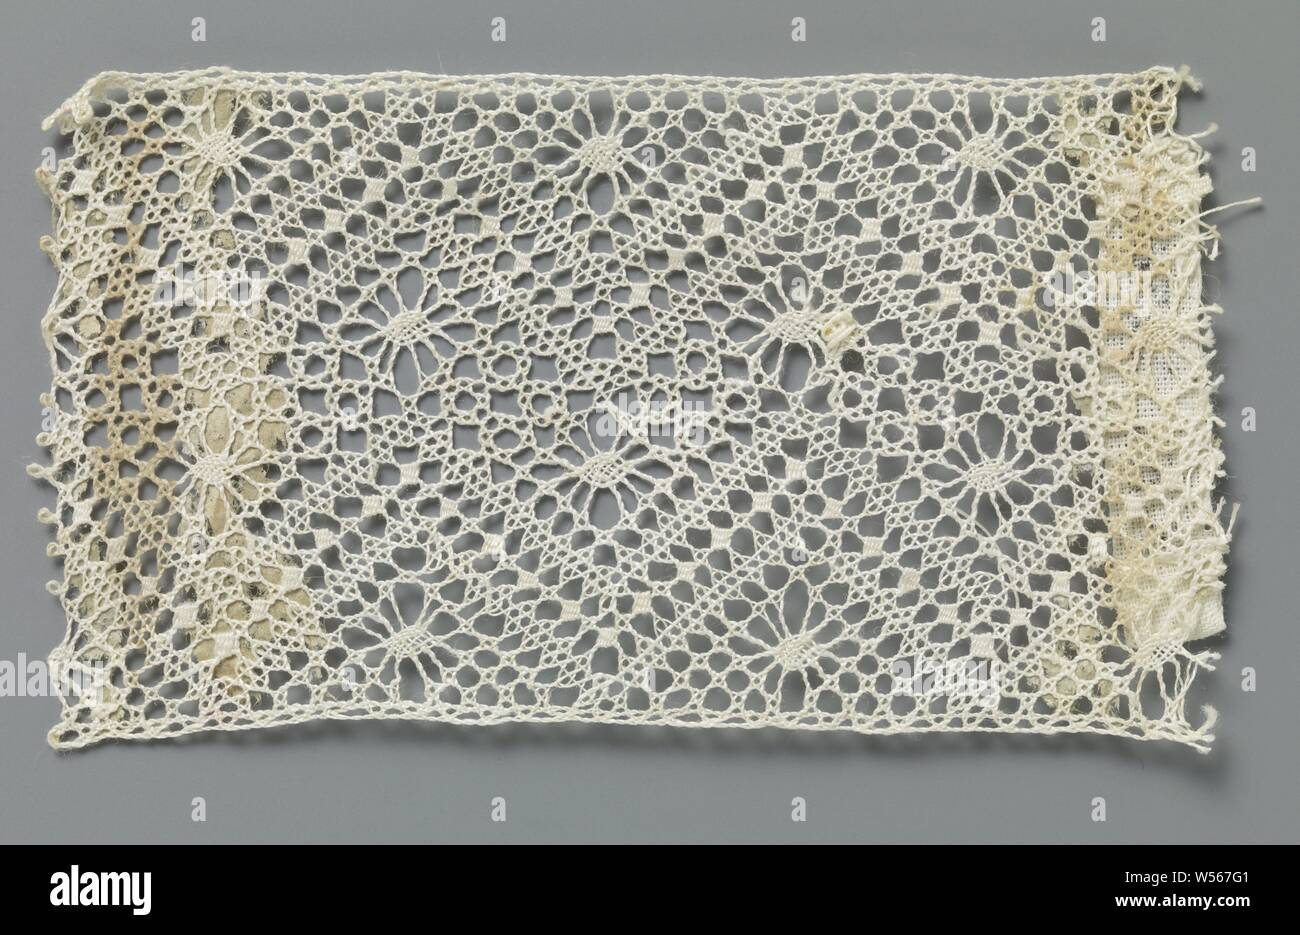 Bobbin-lace insert with two zigzag lines, Natural-colored bobbin lace strip: lace-up. The repeating pattern consists of two parallel zigzag paths with a center line of concatenated fine diamonds made in form. At the top and bottom of the zigzag webs, a sling is used, and between the zigzag webs a twisted cross-streaked soil is used. There are pointed oval spots in the grounds. The top and bottom of the strip are finished straight., anonymous, Russia (possibly), c. 1900, linen (material), torchon lace, l 8 cm × w 4.5 cm ×, 2.6 cm Stock Photo